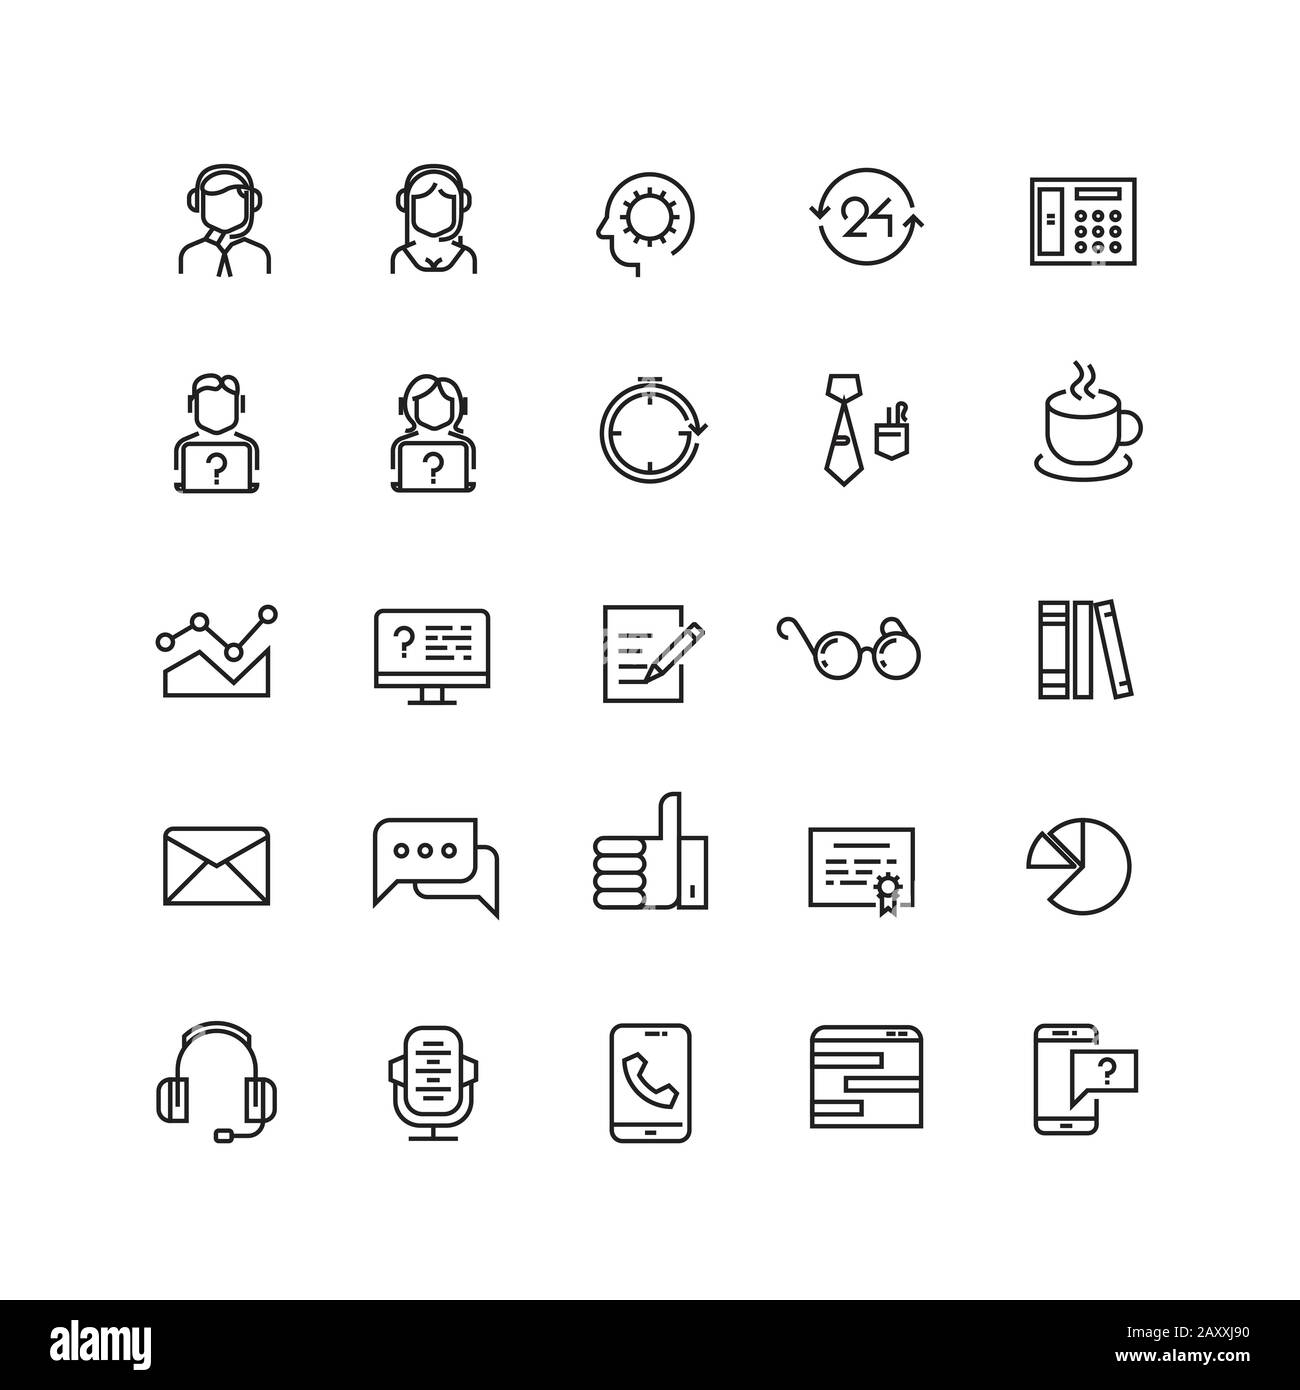 Support service, telemarketing, contact us vector line icons. Support contact, support icon, support help illustration Stock Vector